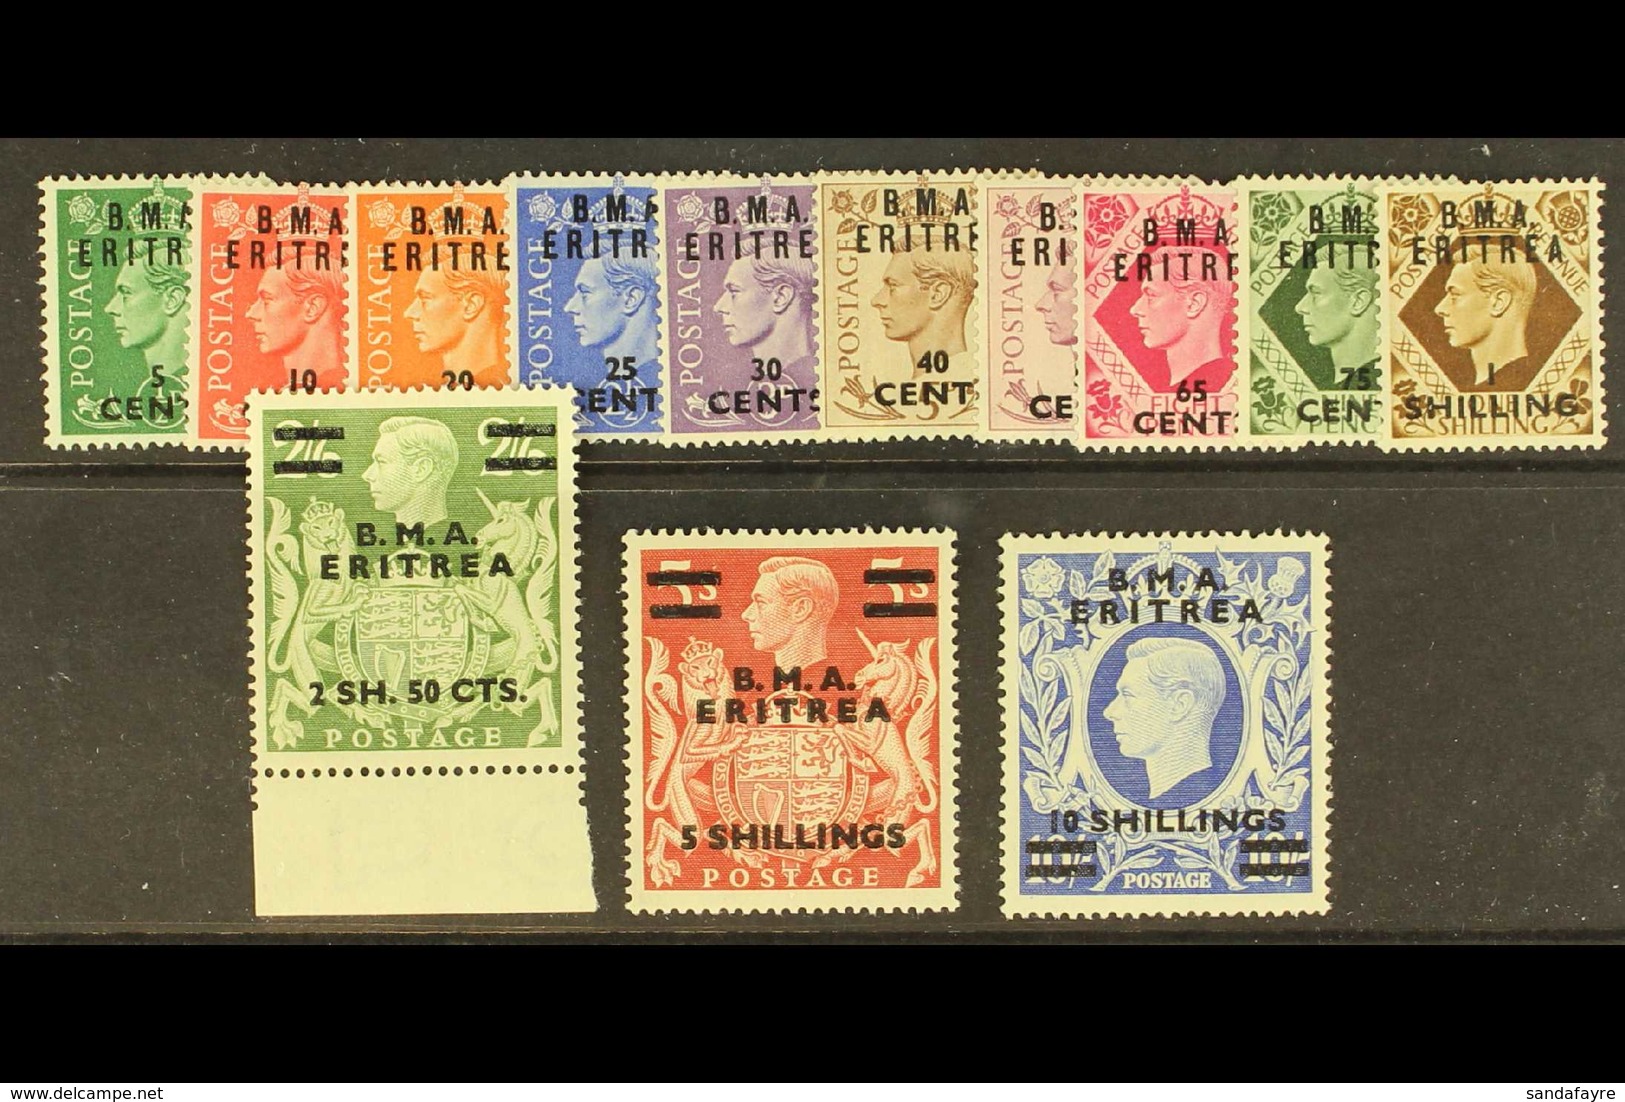 ERITREA 1948 B.M.A. Surcharge Set Complete, SG E1/12, Very Fine Never Hinged Mint. (13 Stamps) For More Images, Please V - Italian Eastern Africa